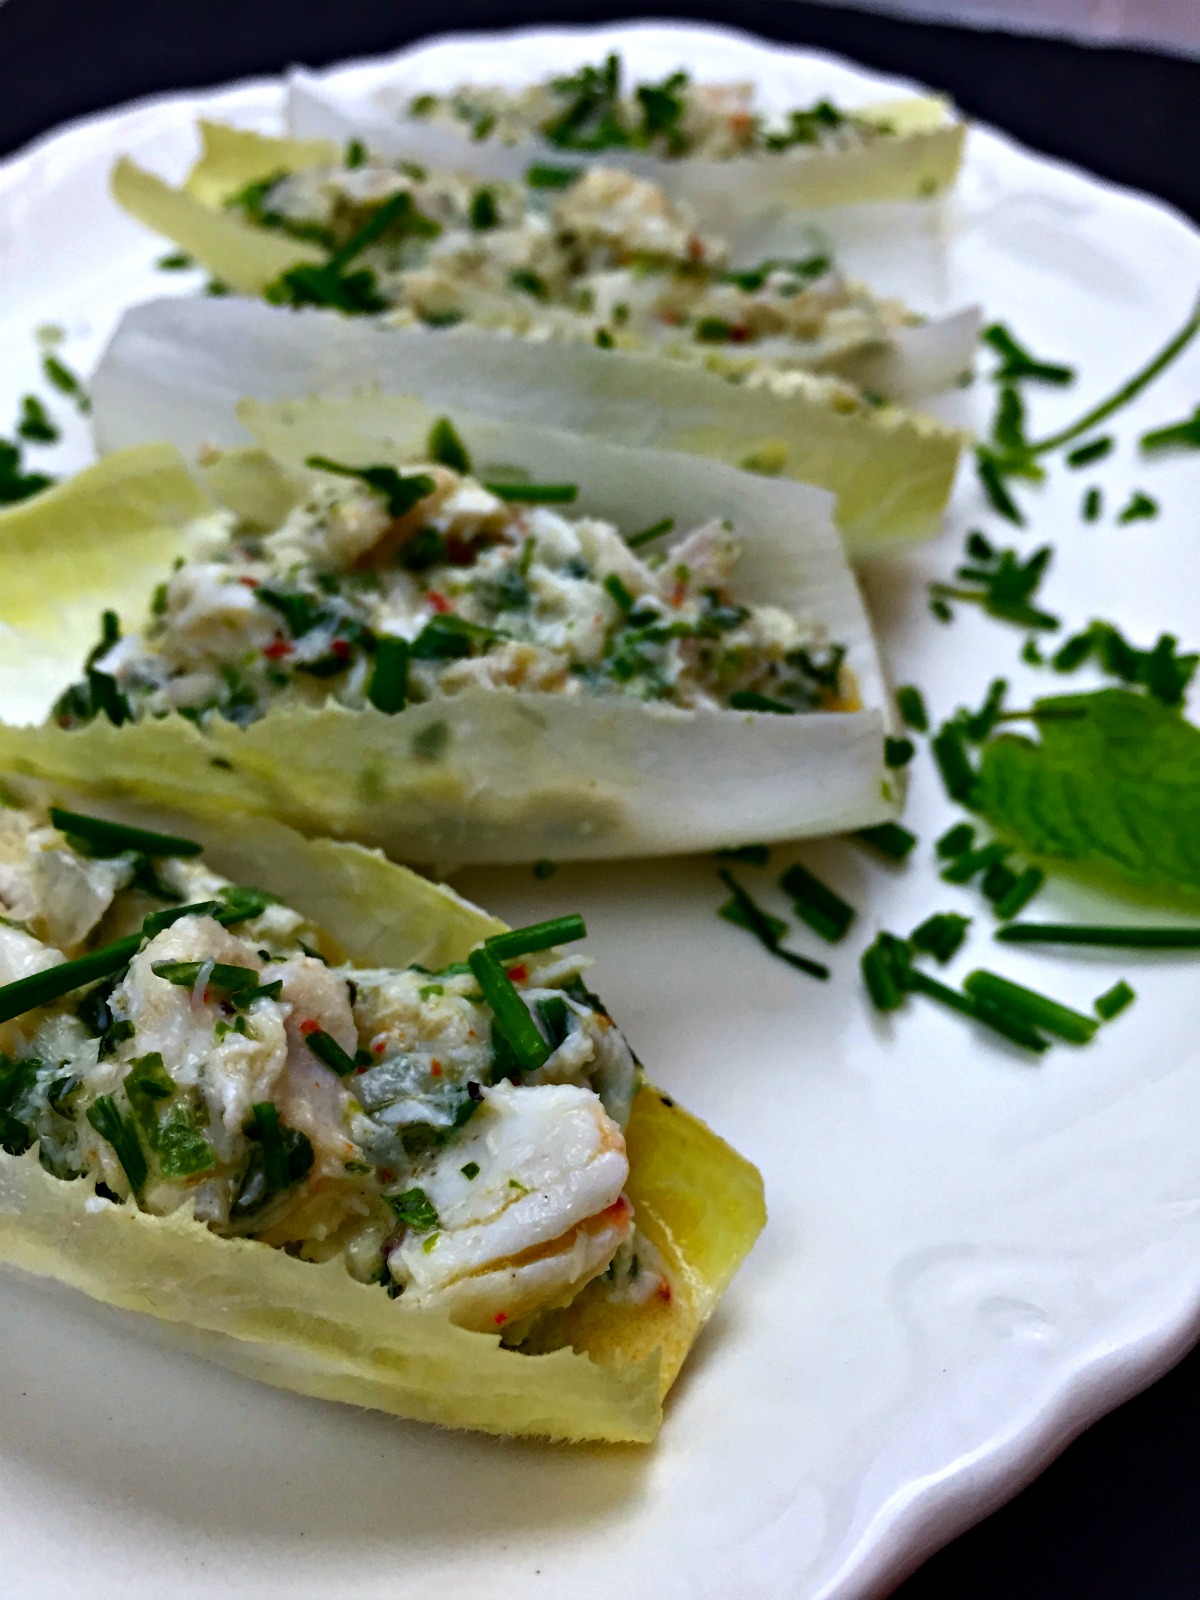 crab salad with lime, mint, and chives on endive :: by radish*rose